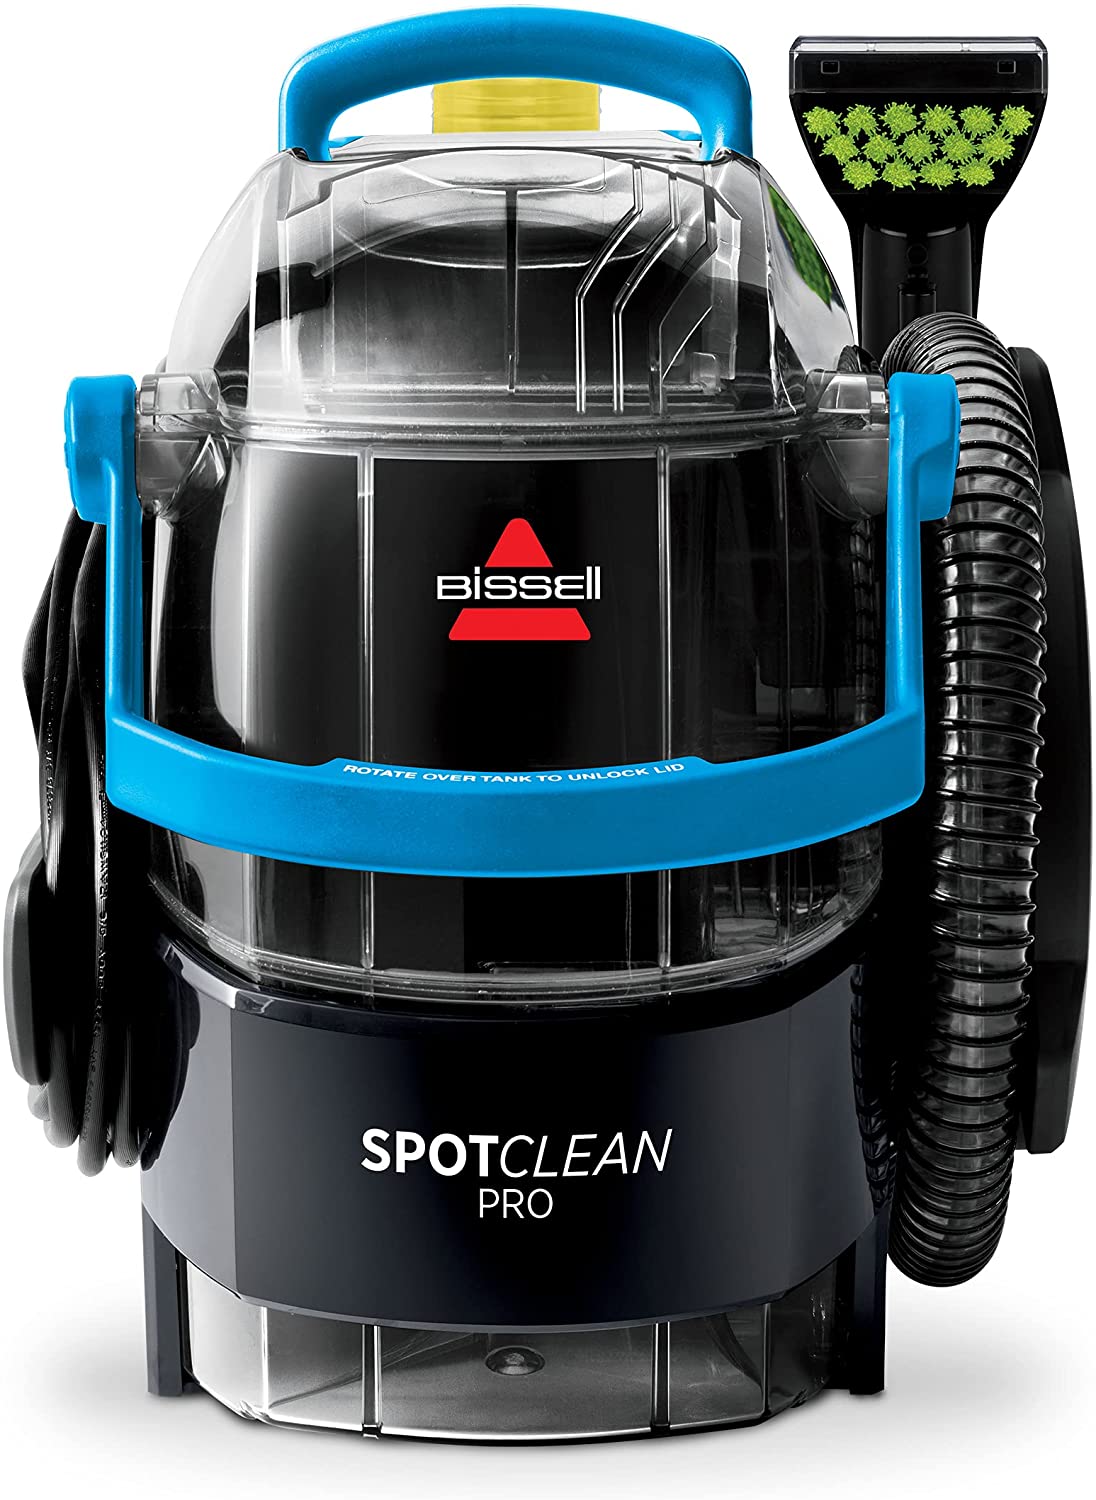 BISSELL SpotClean Pro Portable Carpet Cleaner with Antibacterial Formula